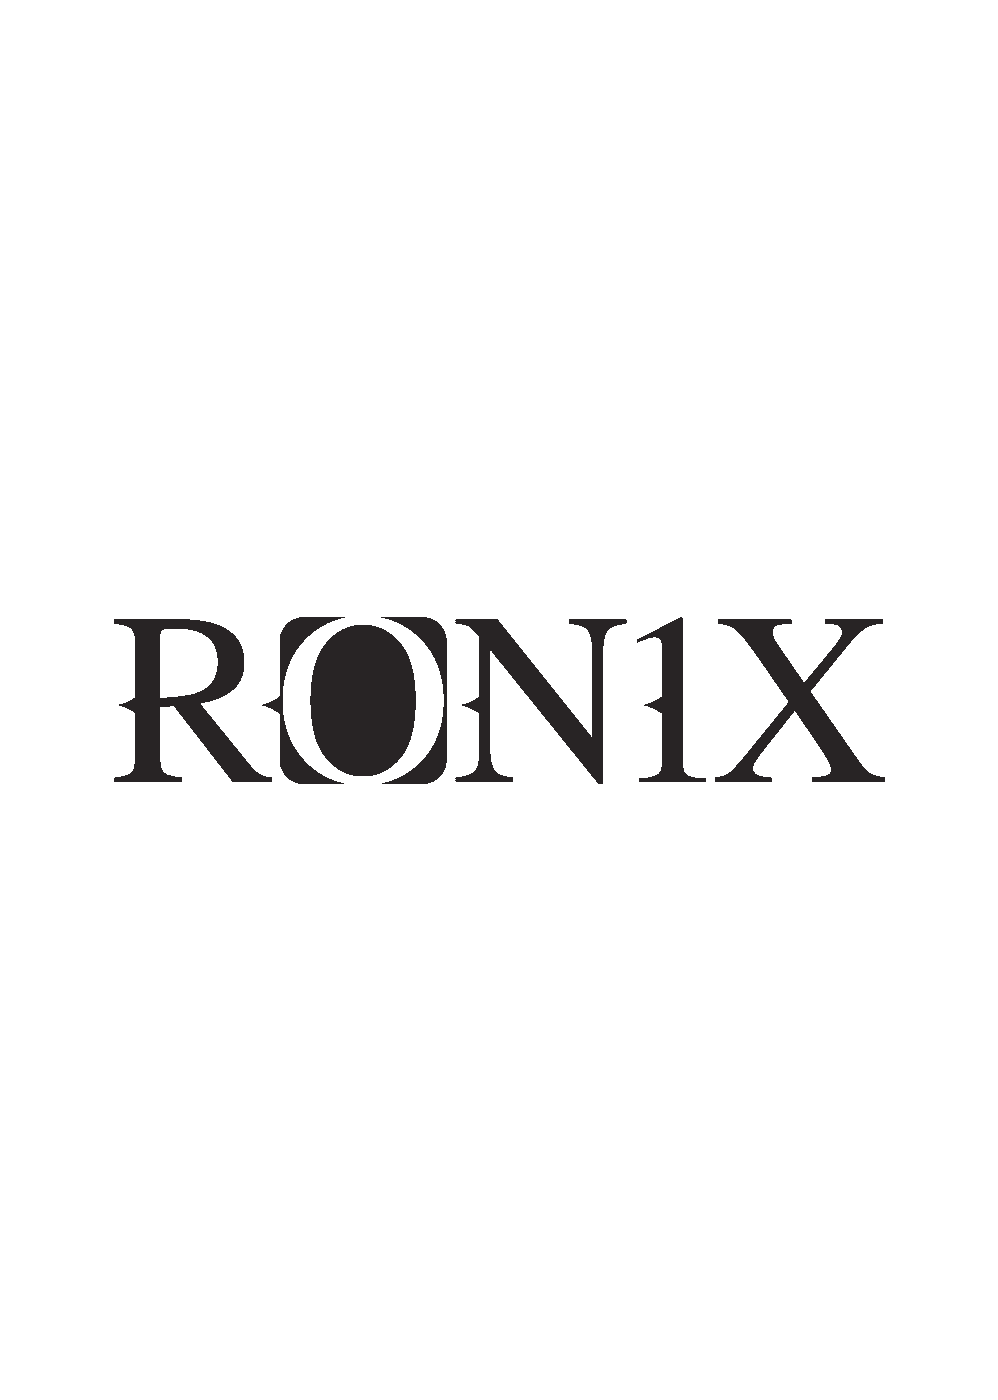 RONIX RED LOGO STICKER DECAL  YOU GET 2 WAKEBOARD With FREE R 